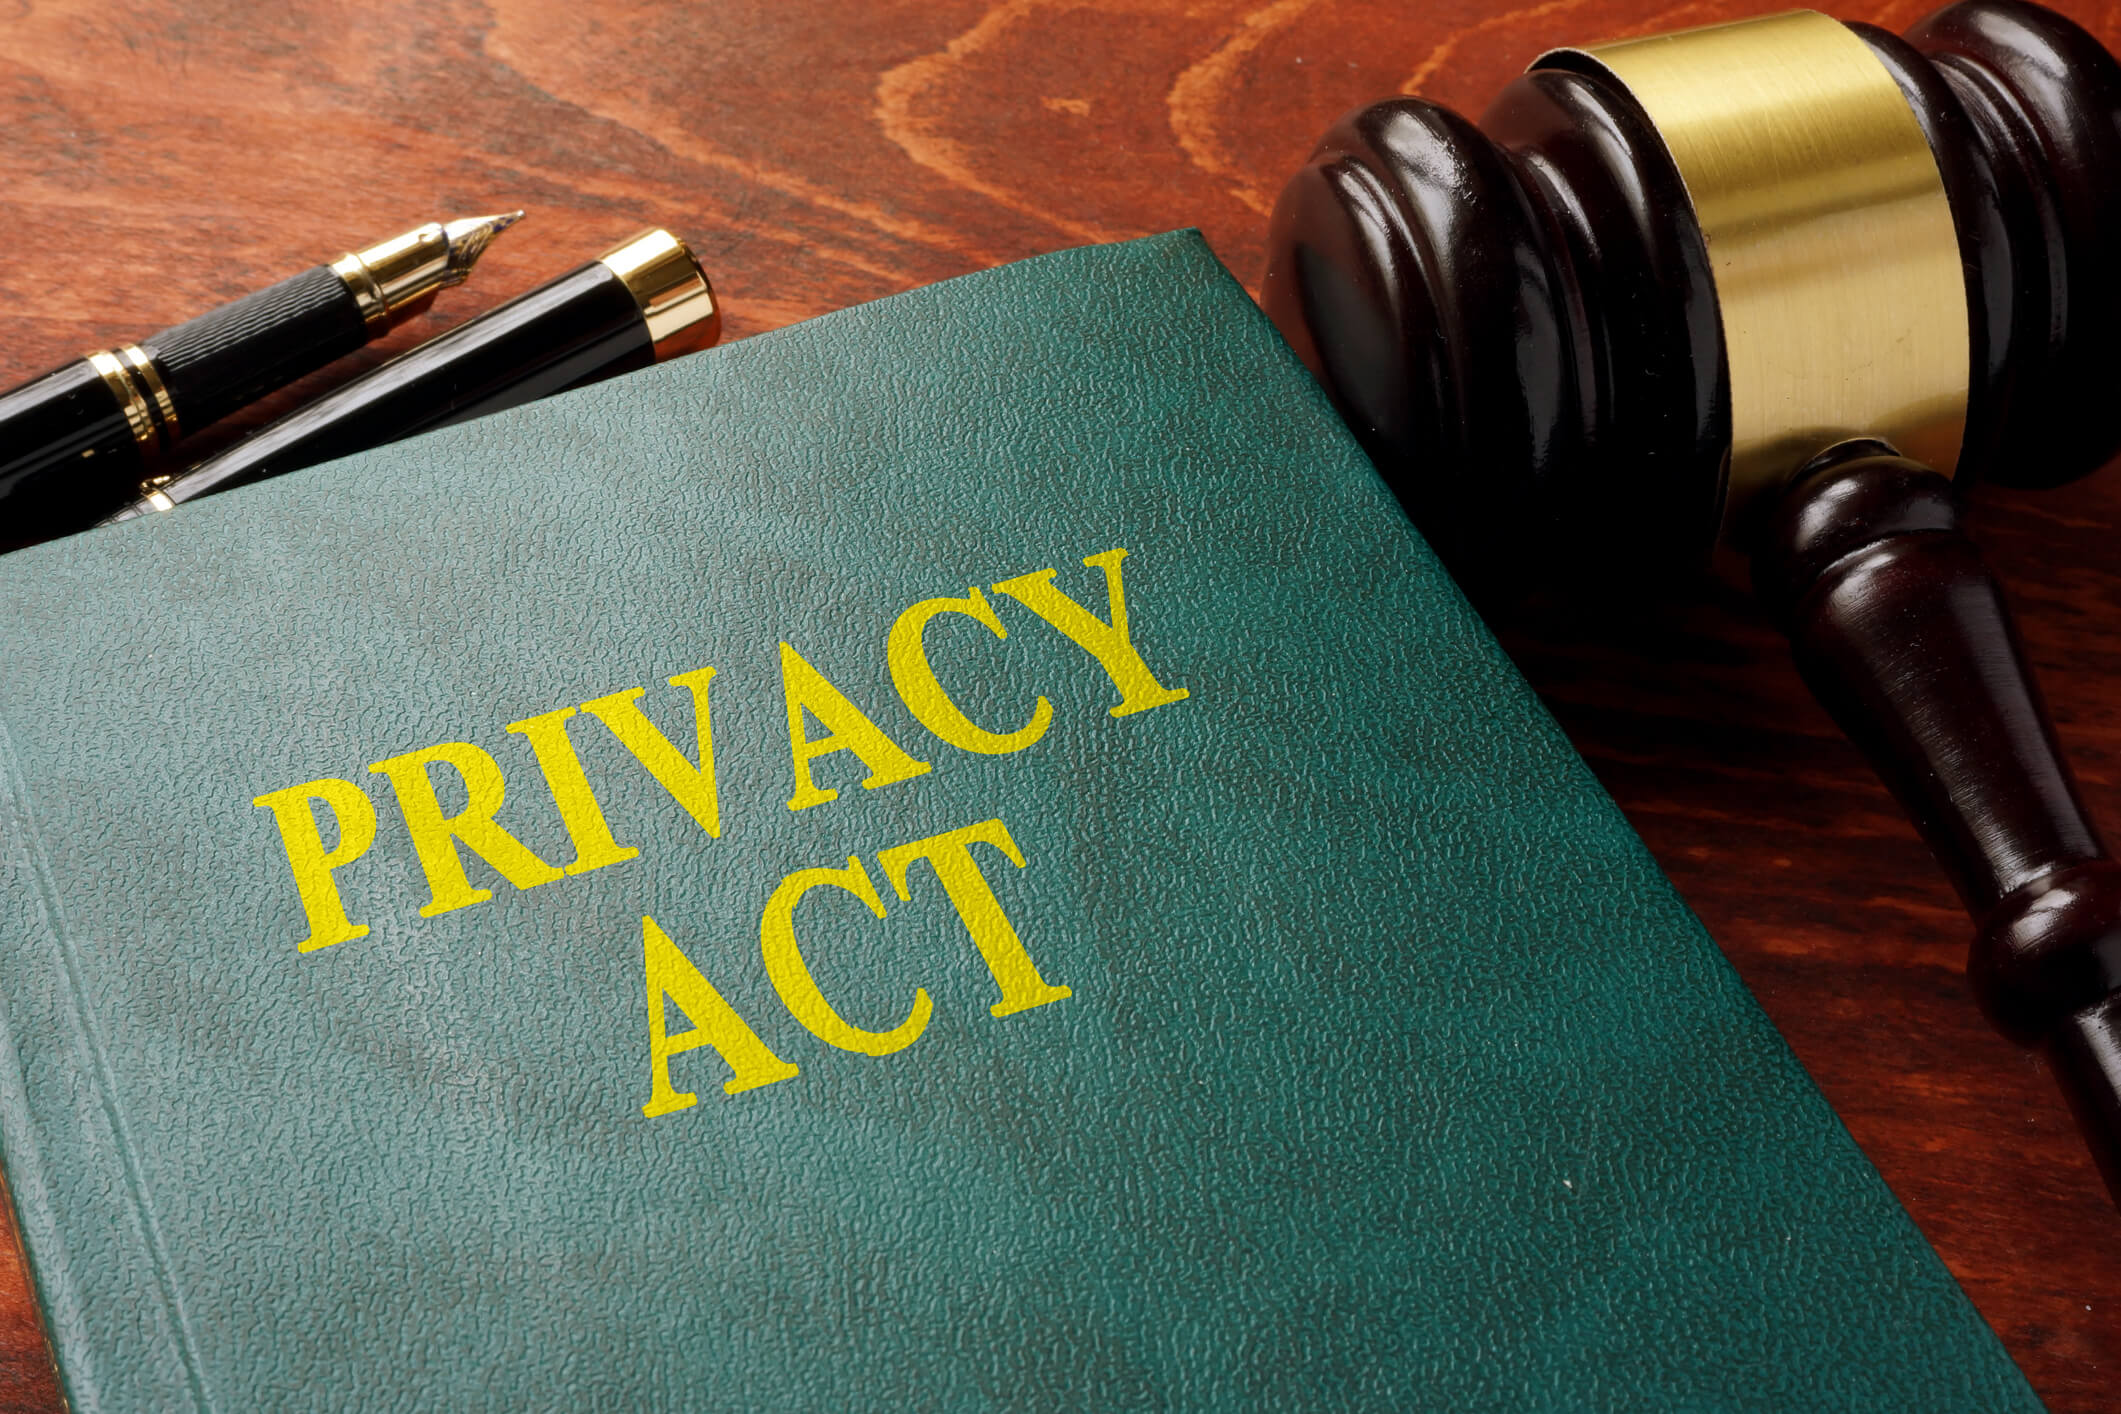 Title privacy act on the book